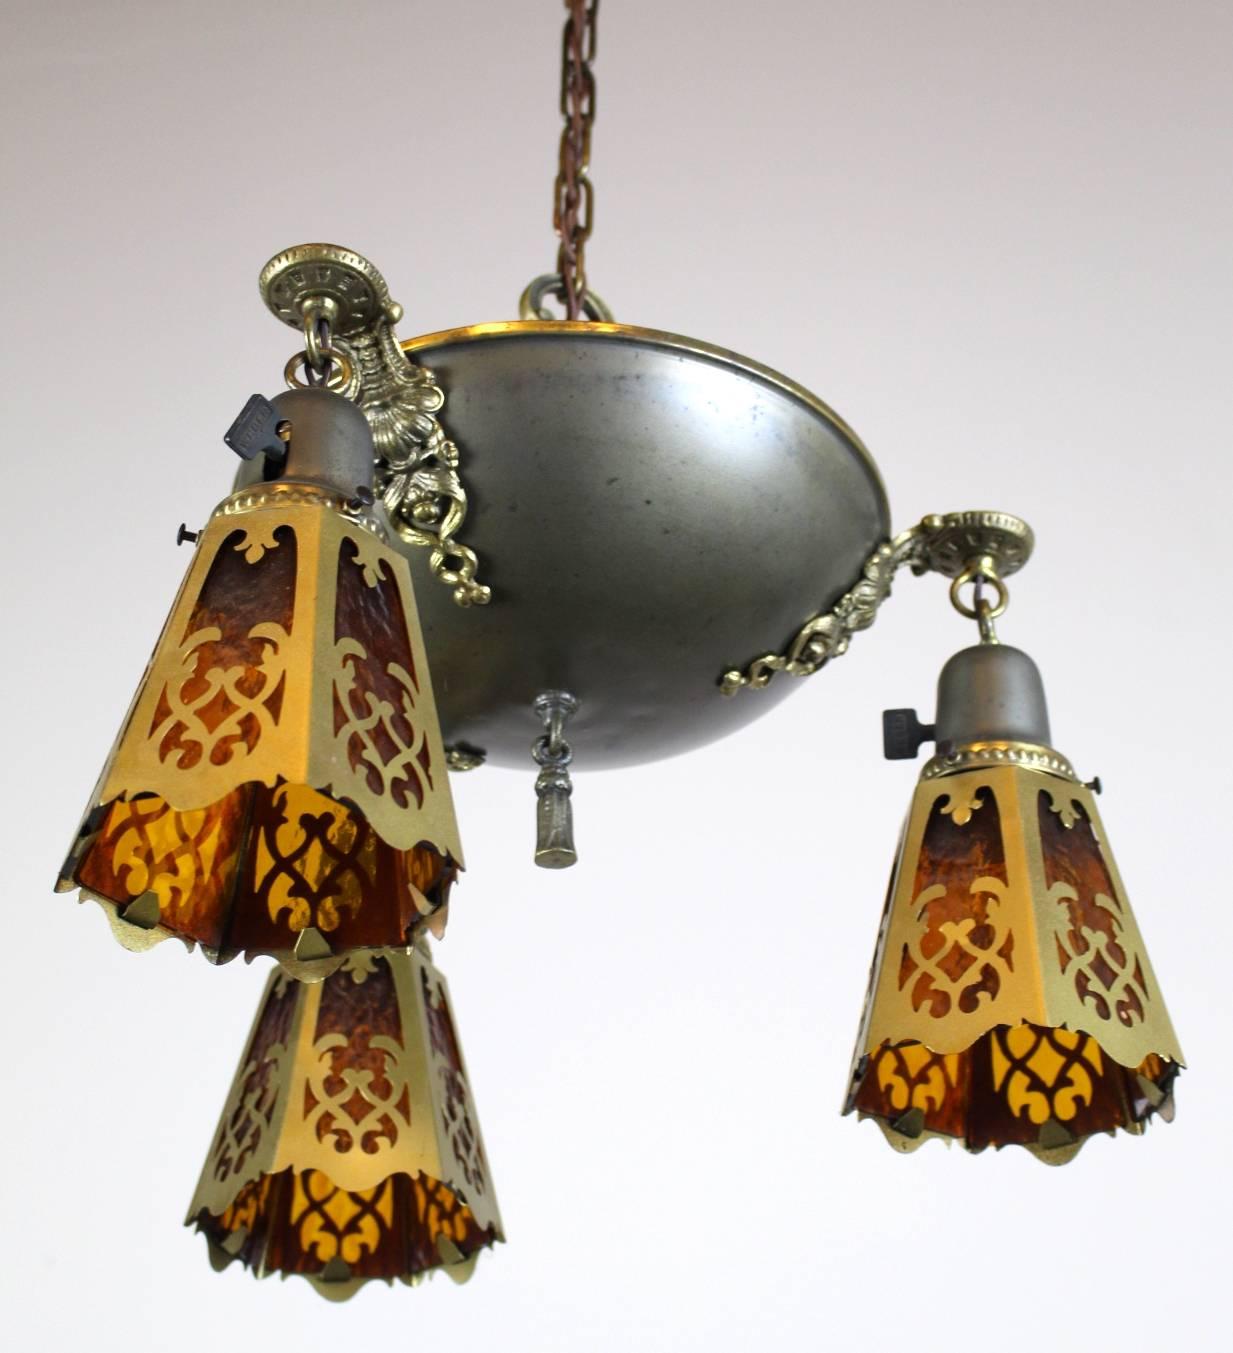 Early 20th Century Art Nouveau Inspired Three-Light Pan Fixture For Sale